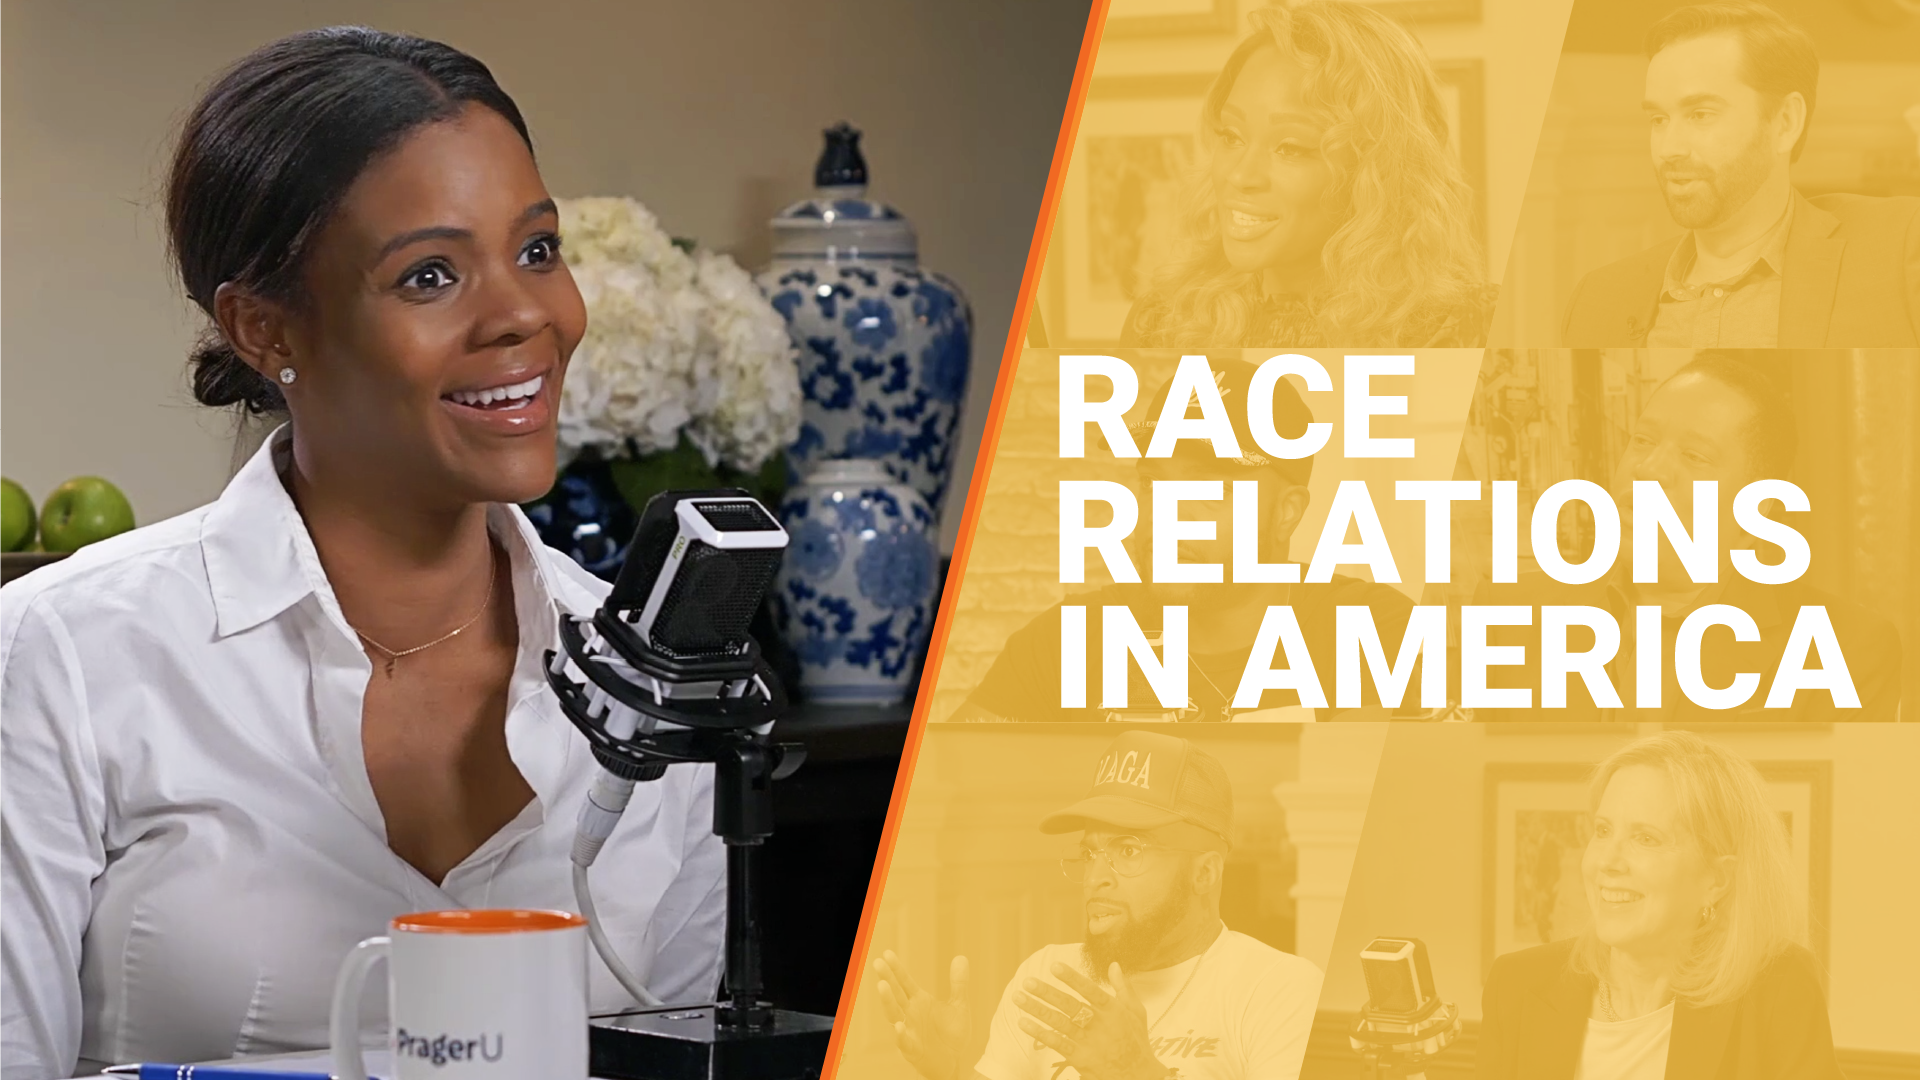 Candace Race Relations